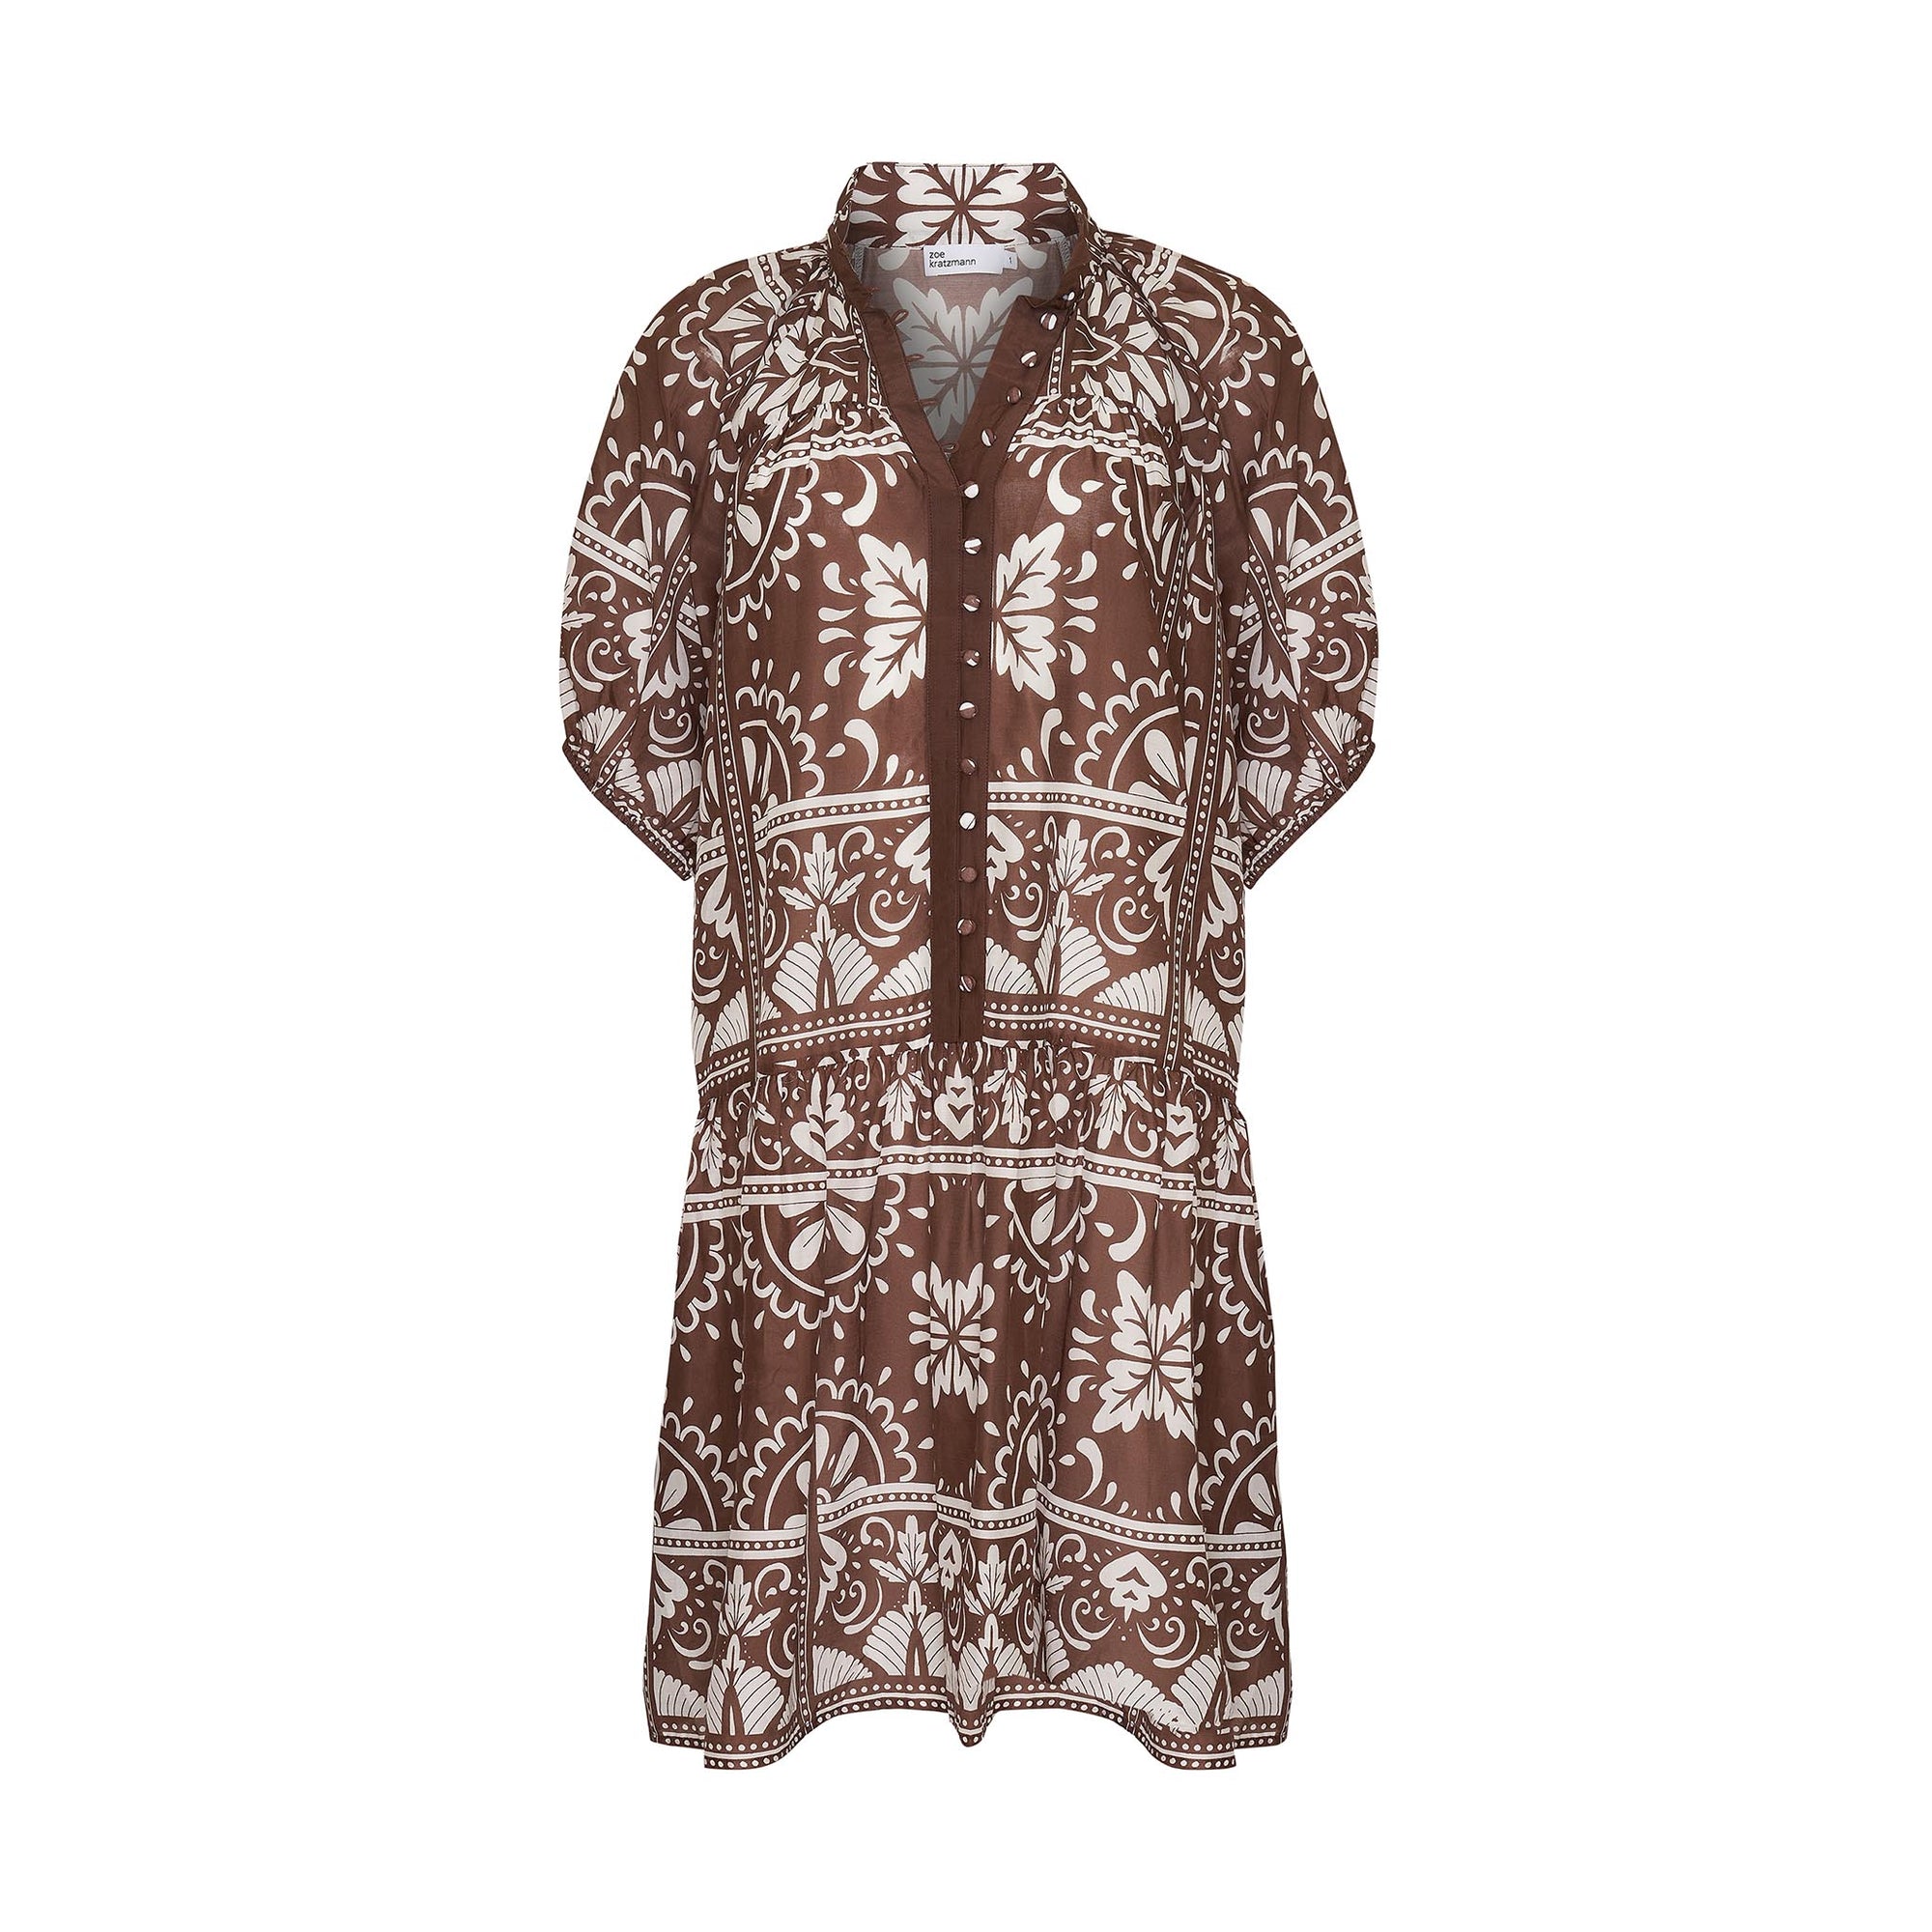 brown and white print, high neck, buttons to waist, mid length sleeve, dress, drop waist, product image